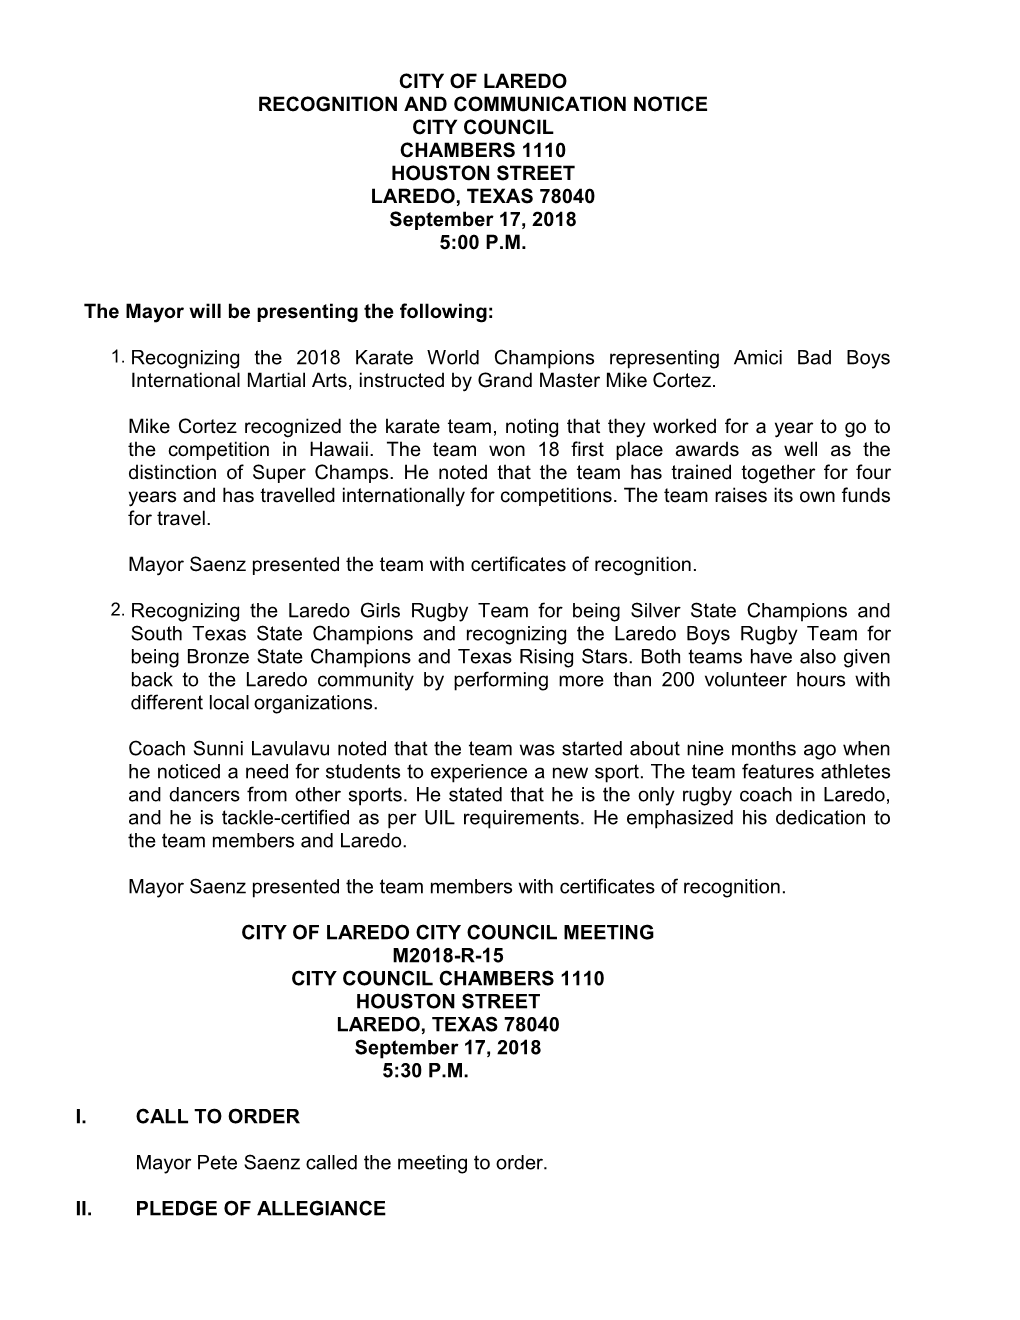 CITY of LAREDO RECOGNITION and COMMUNICATION NOTICE CITY COUNCIL CHAMBERS 1110 HOUSTON STREET LAREDO, TEXAS 78040 September 17, 2018 5:00 P.M